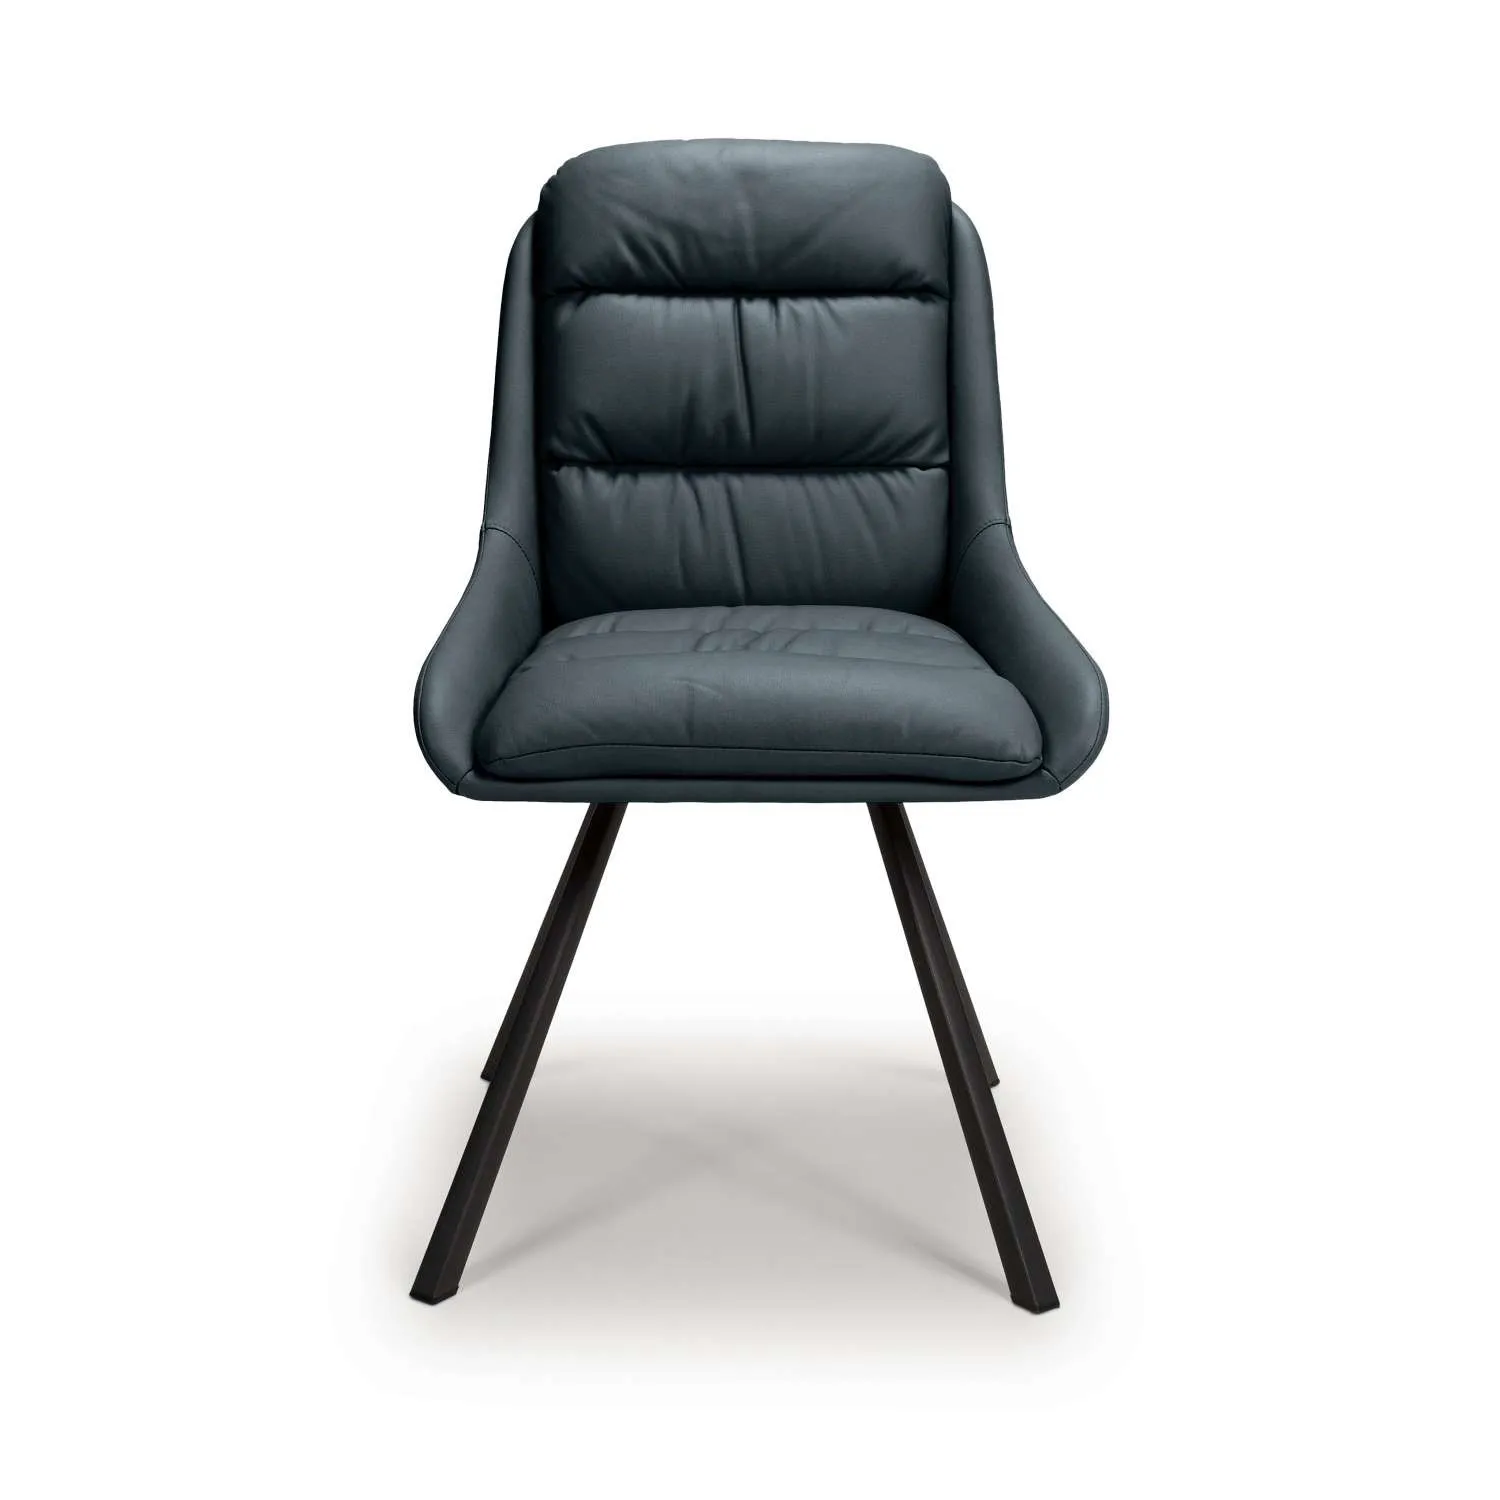 Blue Leather Swivel Dining Chair